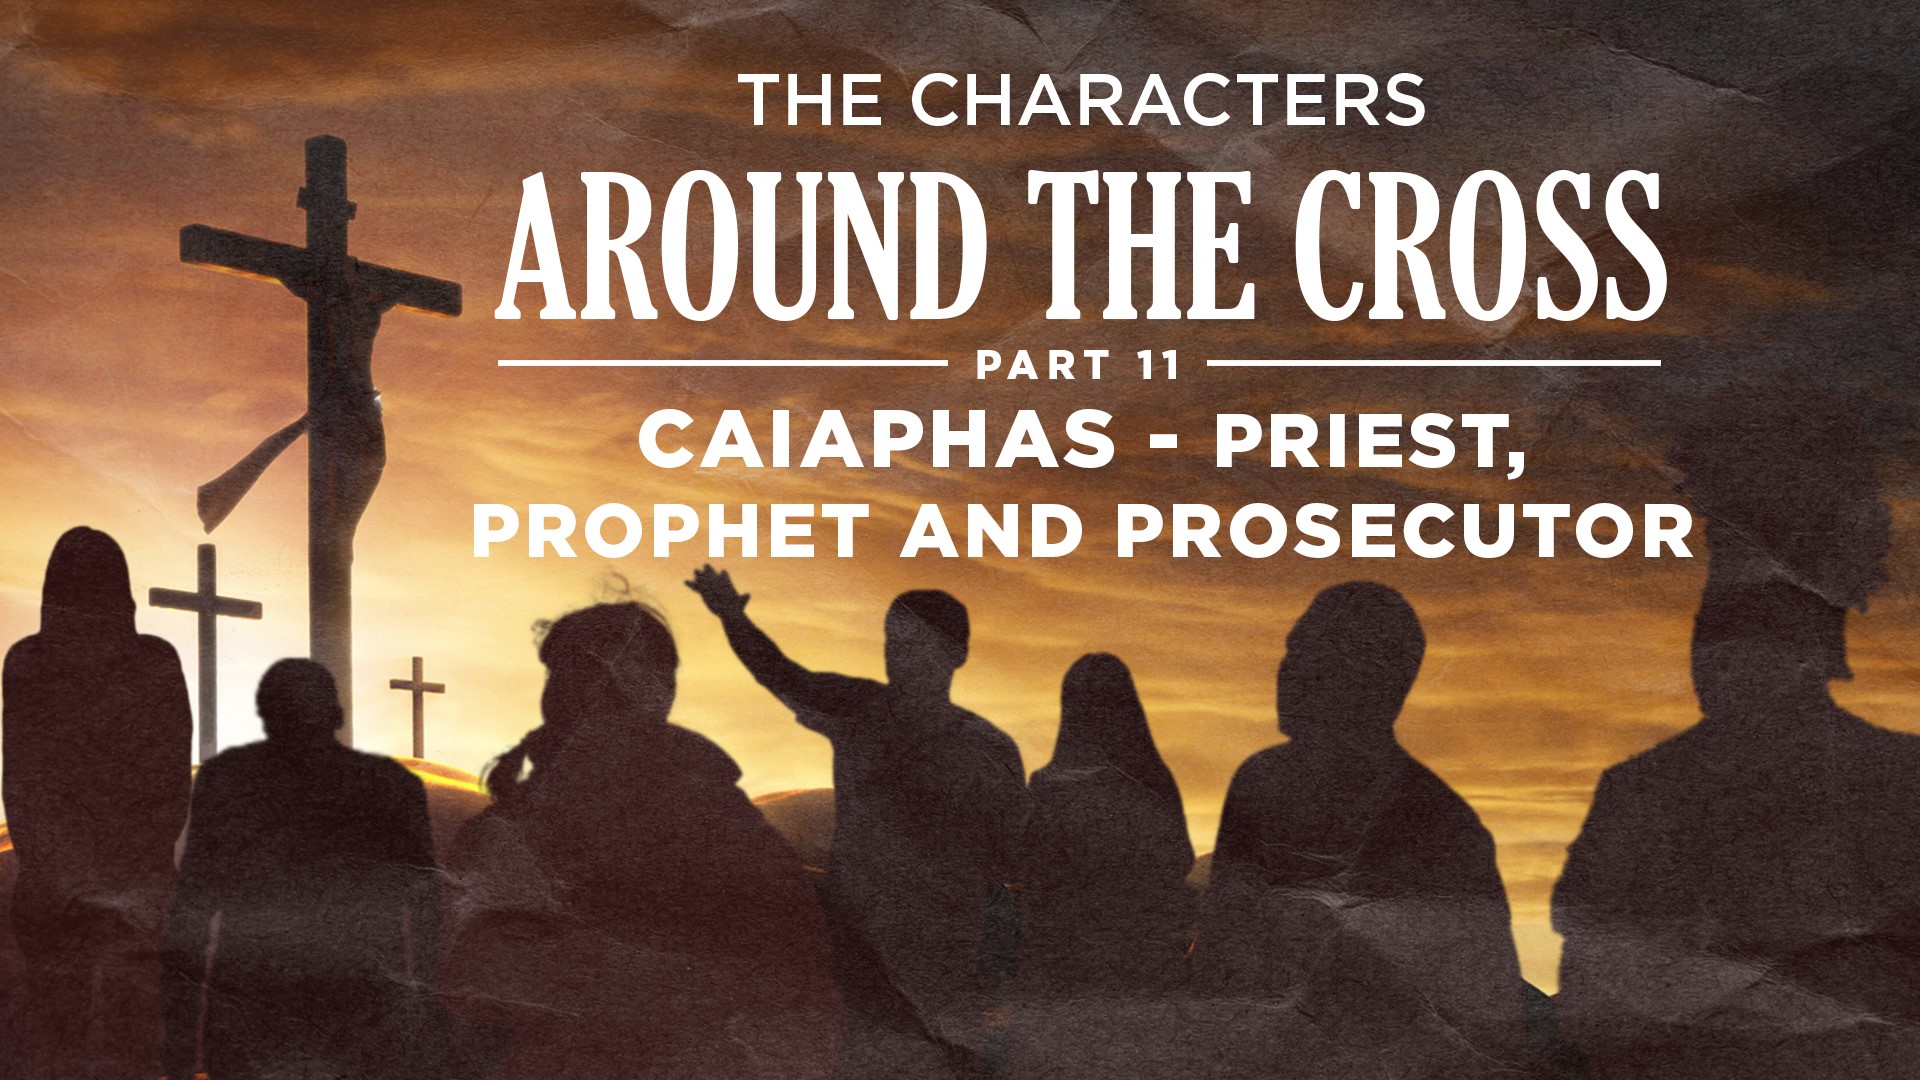 Part 11 - Caiaphas - Priest, Prophet and Prosecutor